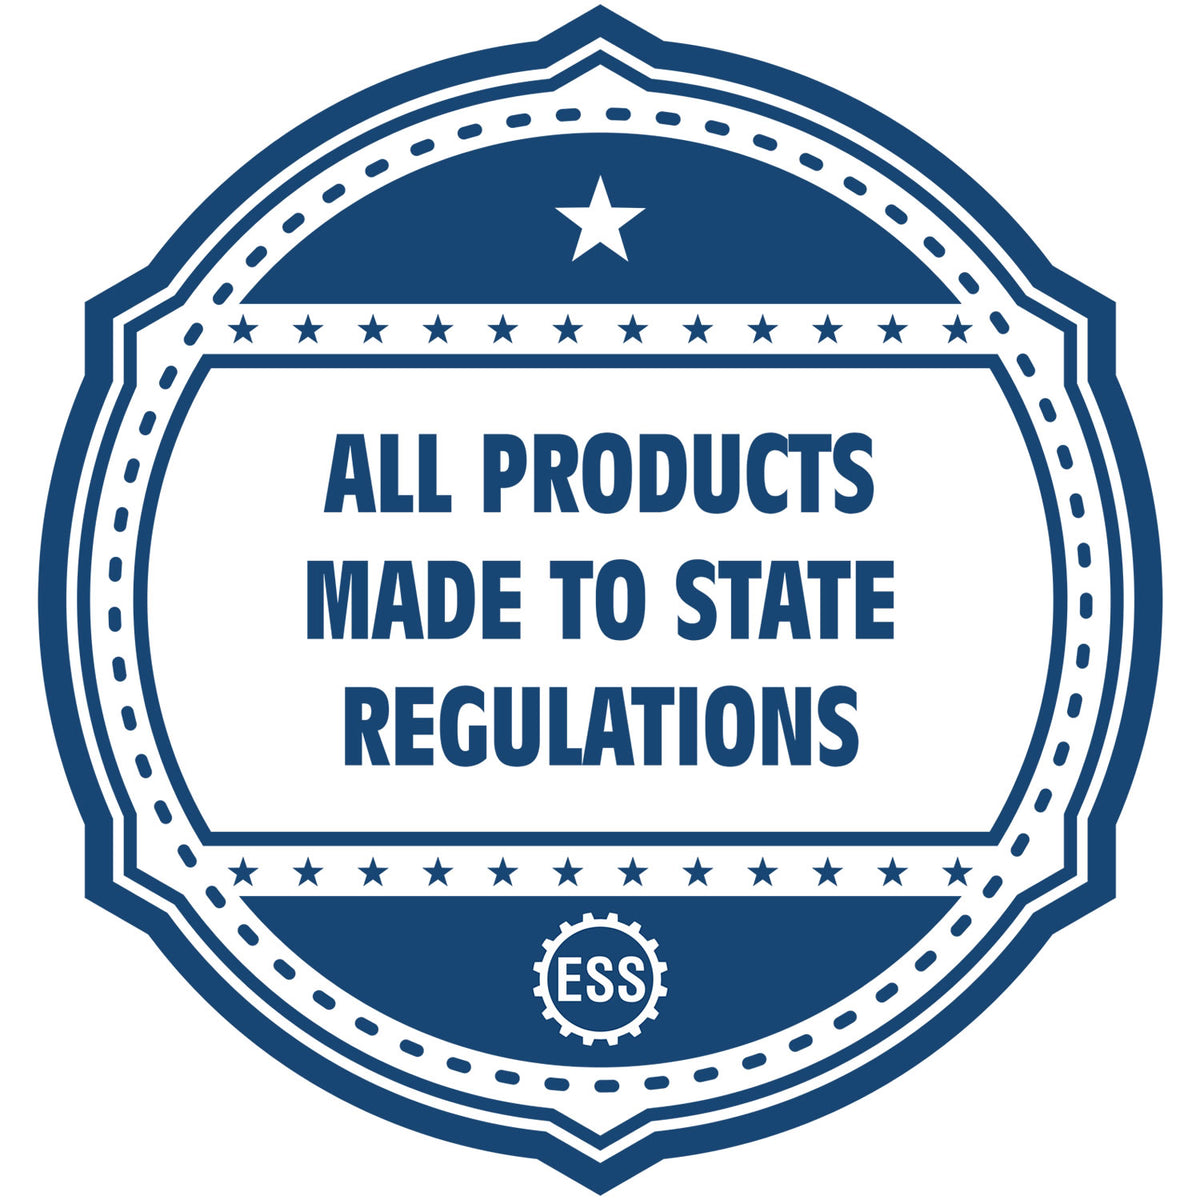 An icon or badge element for the Slim Pre-Inked State Seal Notary Stamp for North Carolina showing that this product is made in compliance with state regulations.